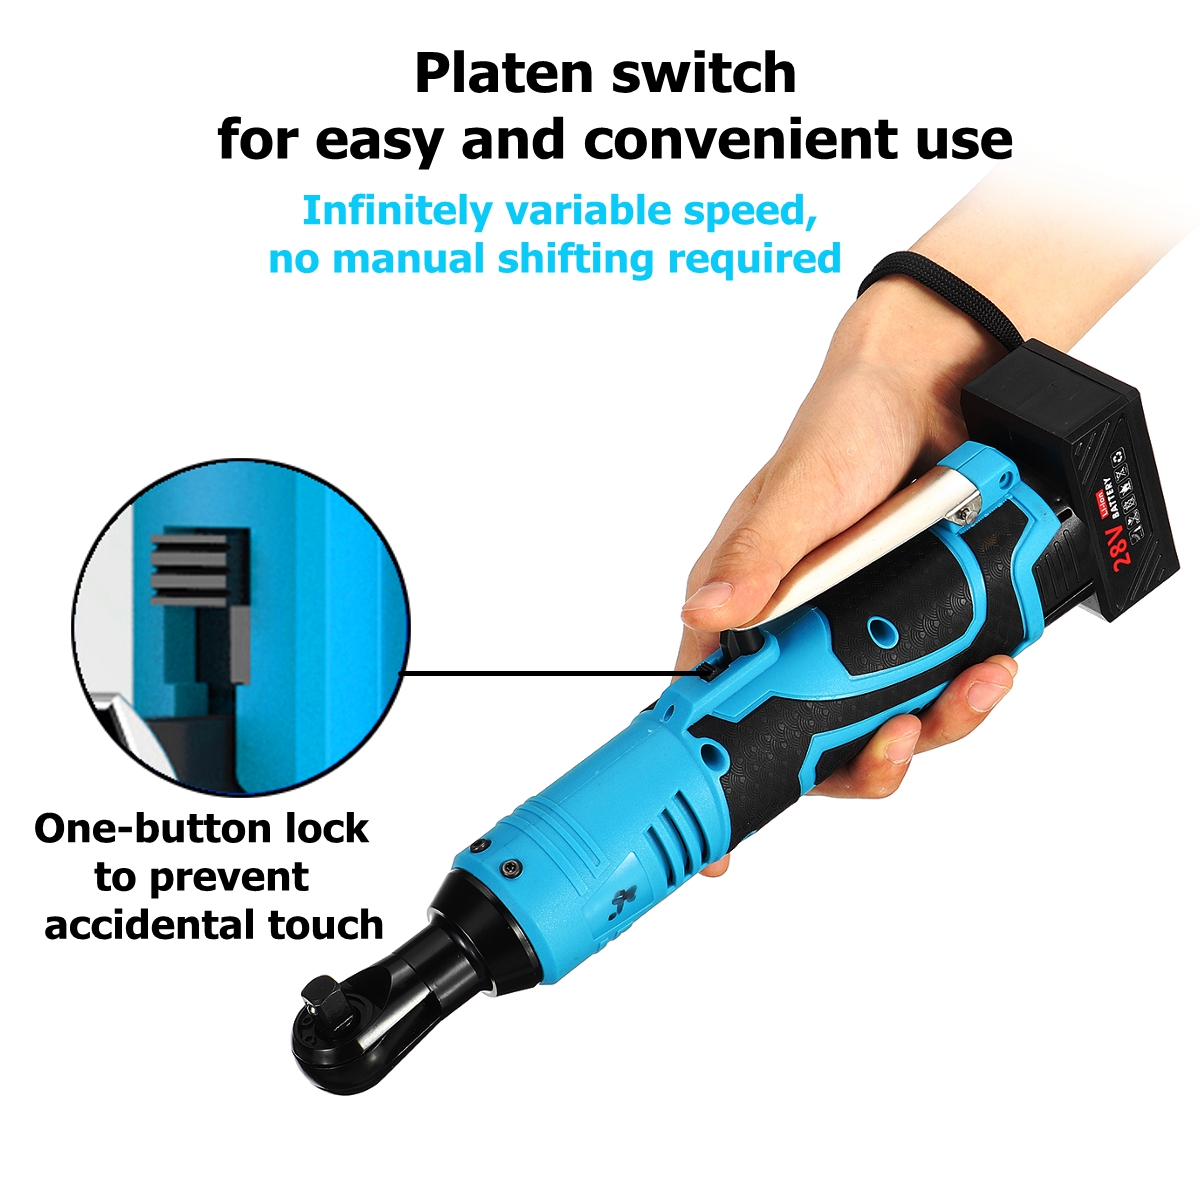 28V-60Nm-Electric-Cordless-90deg-Ratchet-Wrench-38quot-Portable-8000mAh-Rechargeable-Battery-Right-A-1477209-4